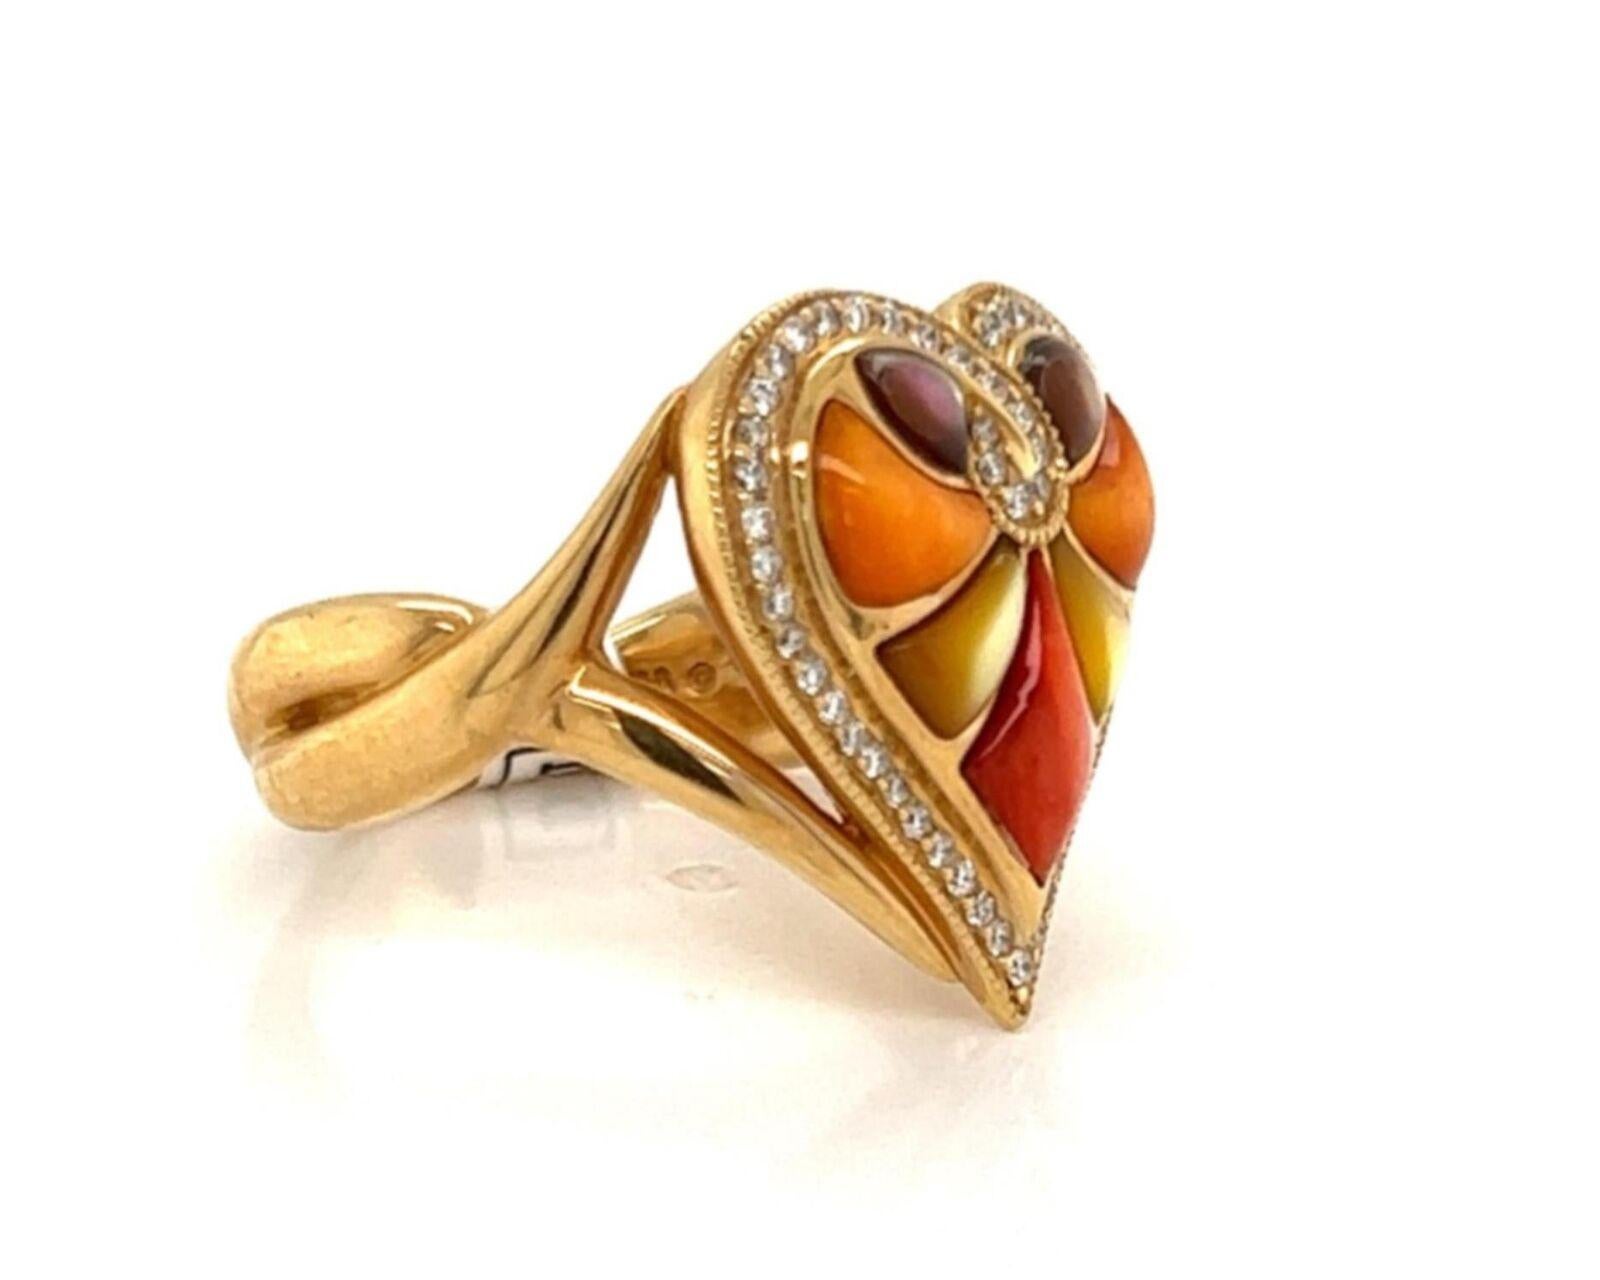 This lovely authentic ring is by Kabana, crafted from 14k yellow gold featuring a split shank with double band in a crossover woven style around the back of the band.  The front of the ring has a stunning heart shape frame with red and orange spiny